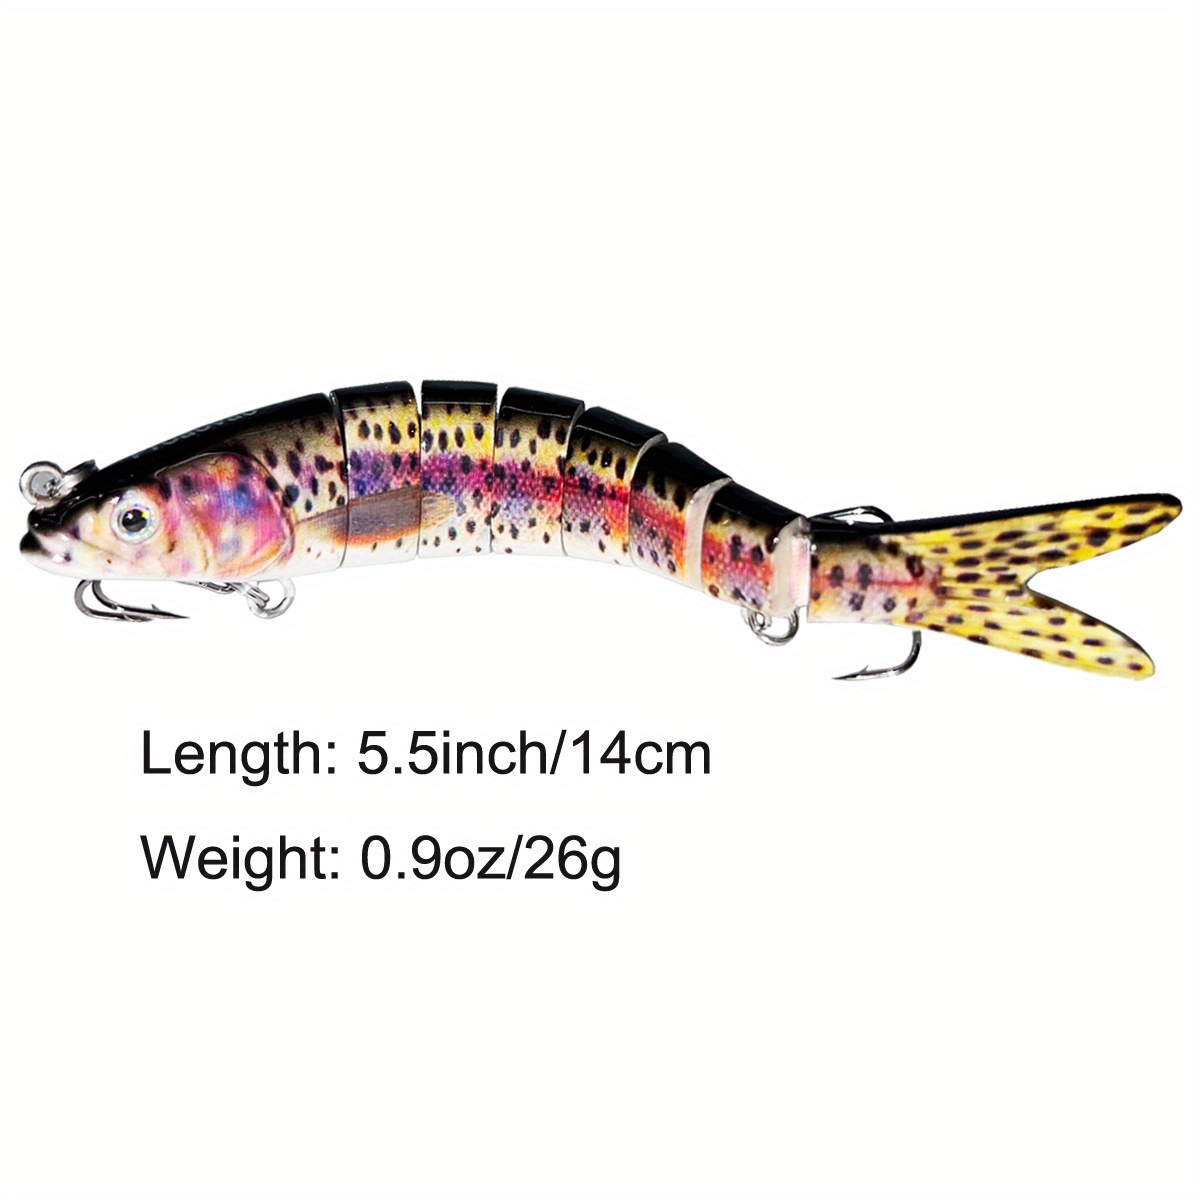 3PCS Bass Fishing Lures for Freshwater & Saltwater, Multi-Jointed Swimbaits  for Trout Salmon Catfish Largemouth Smallmouth